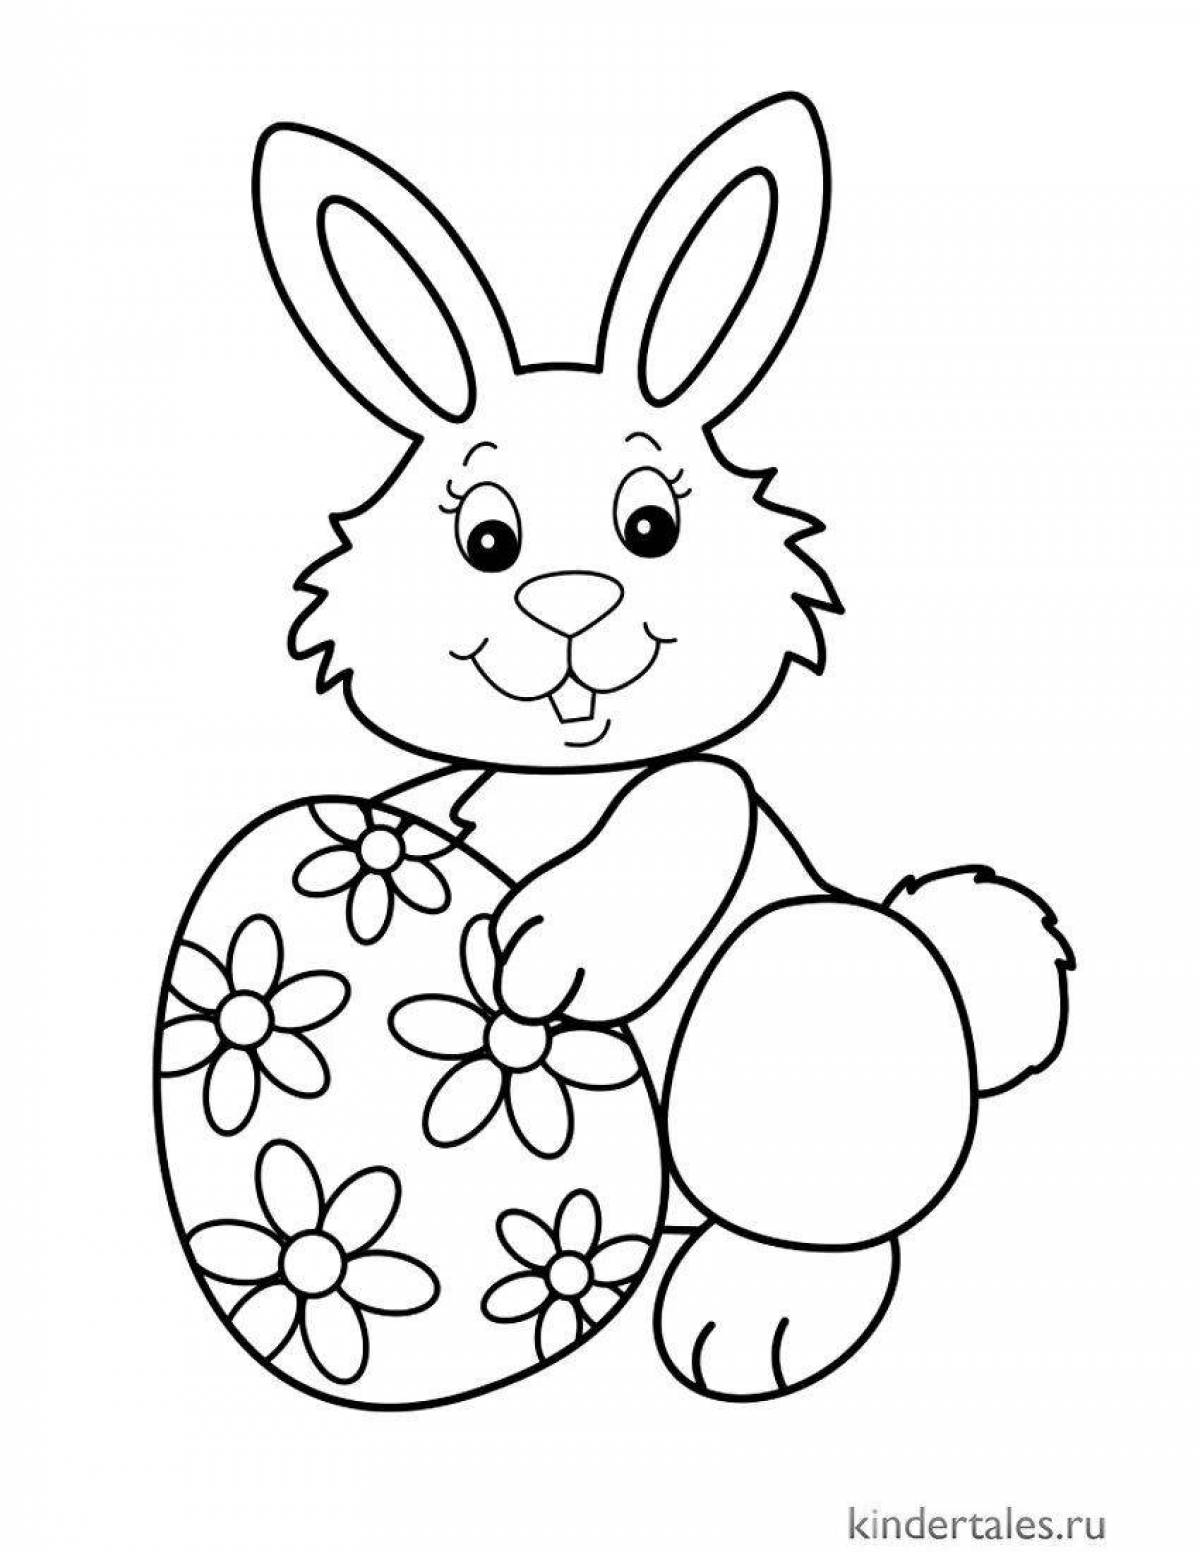 Rainbow hare coloring book